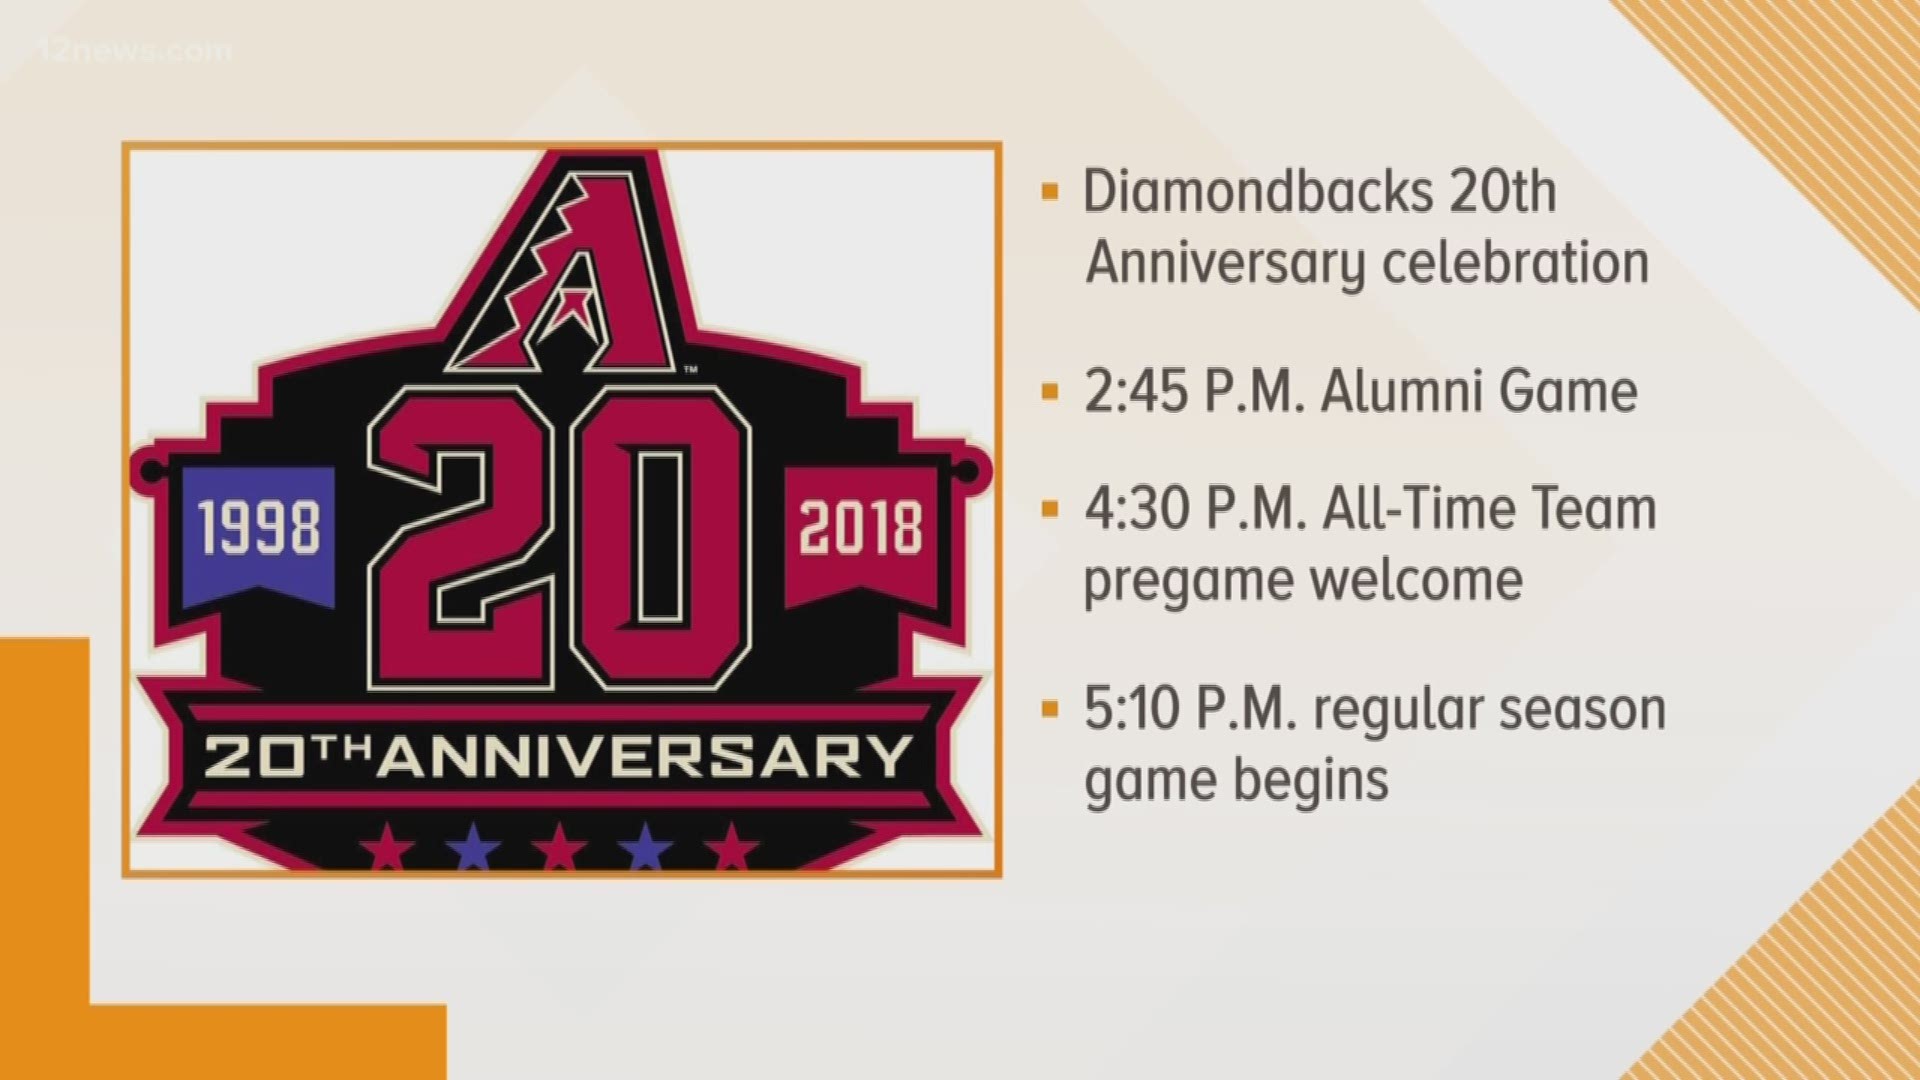 For the Diamondback's 20th anniversary the gift shop has some celebratory items to celebrate for a game.